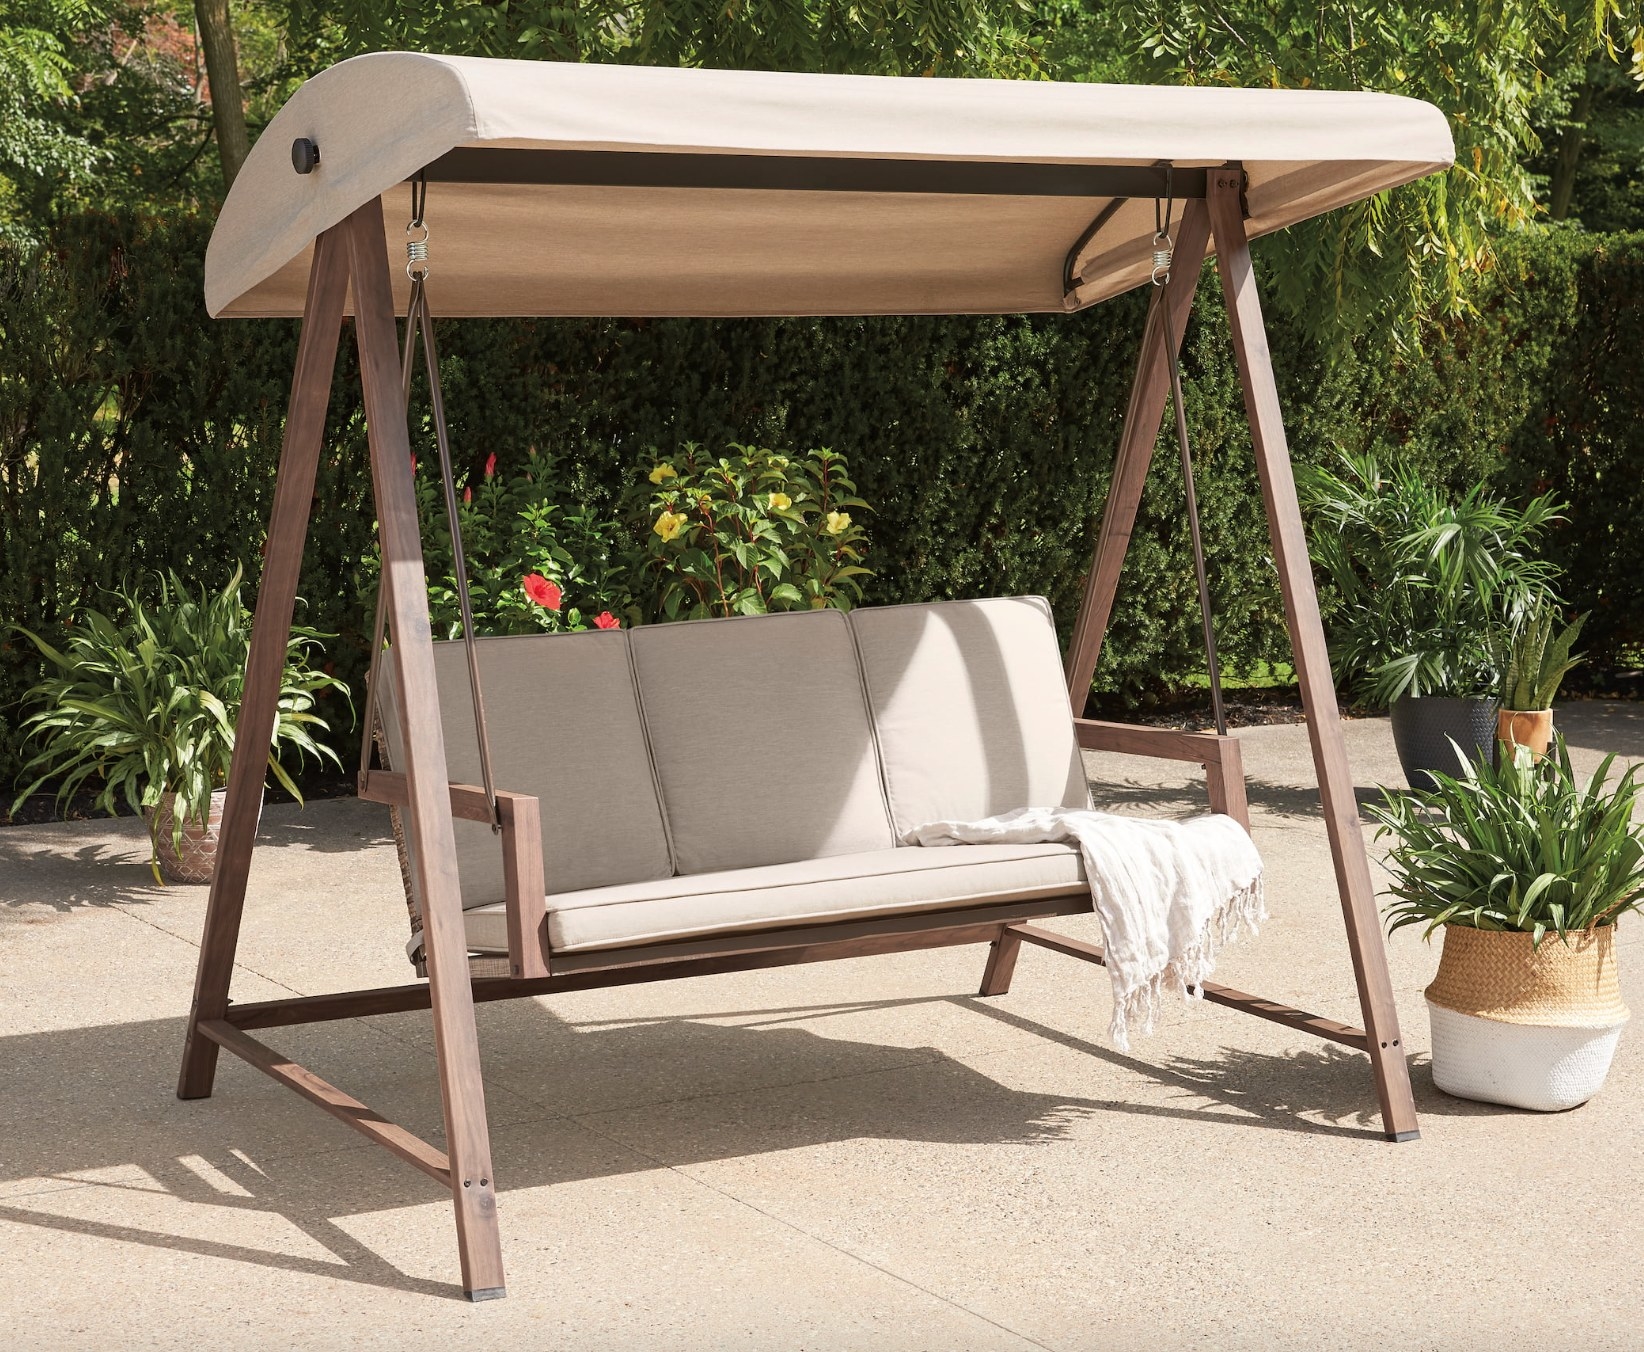 the tan porch swing with a tan canopy in a decorated patio space